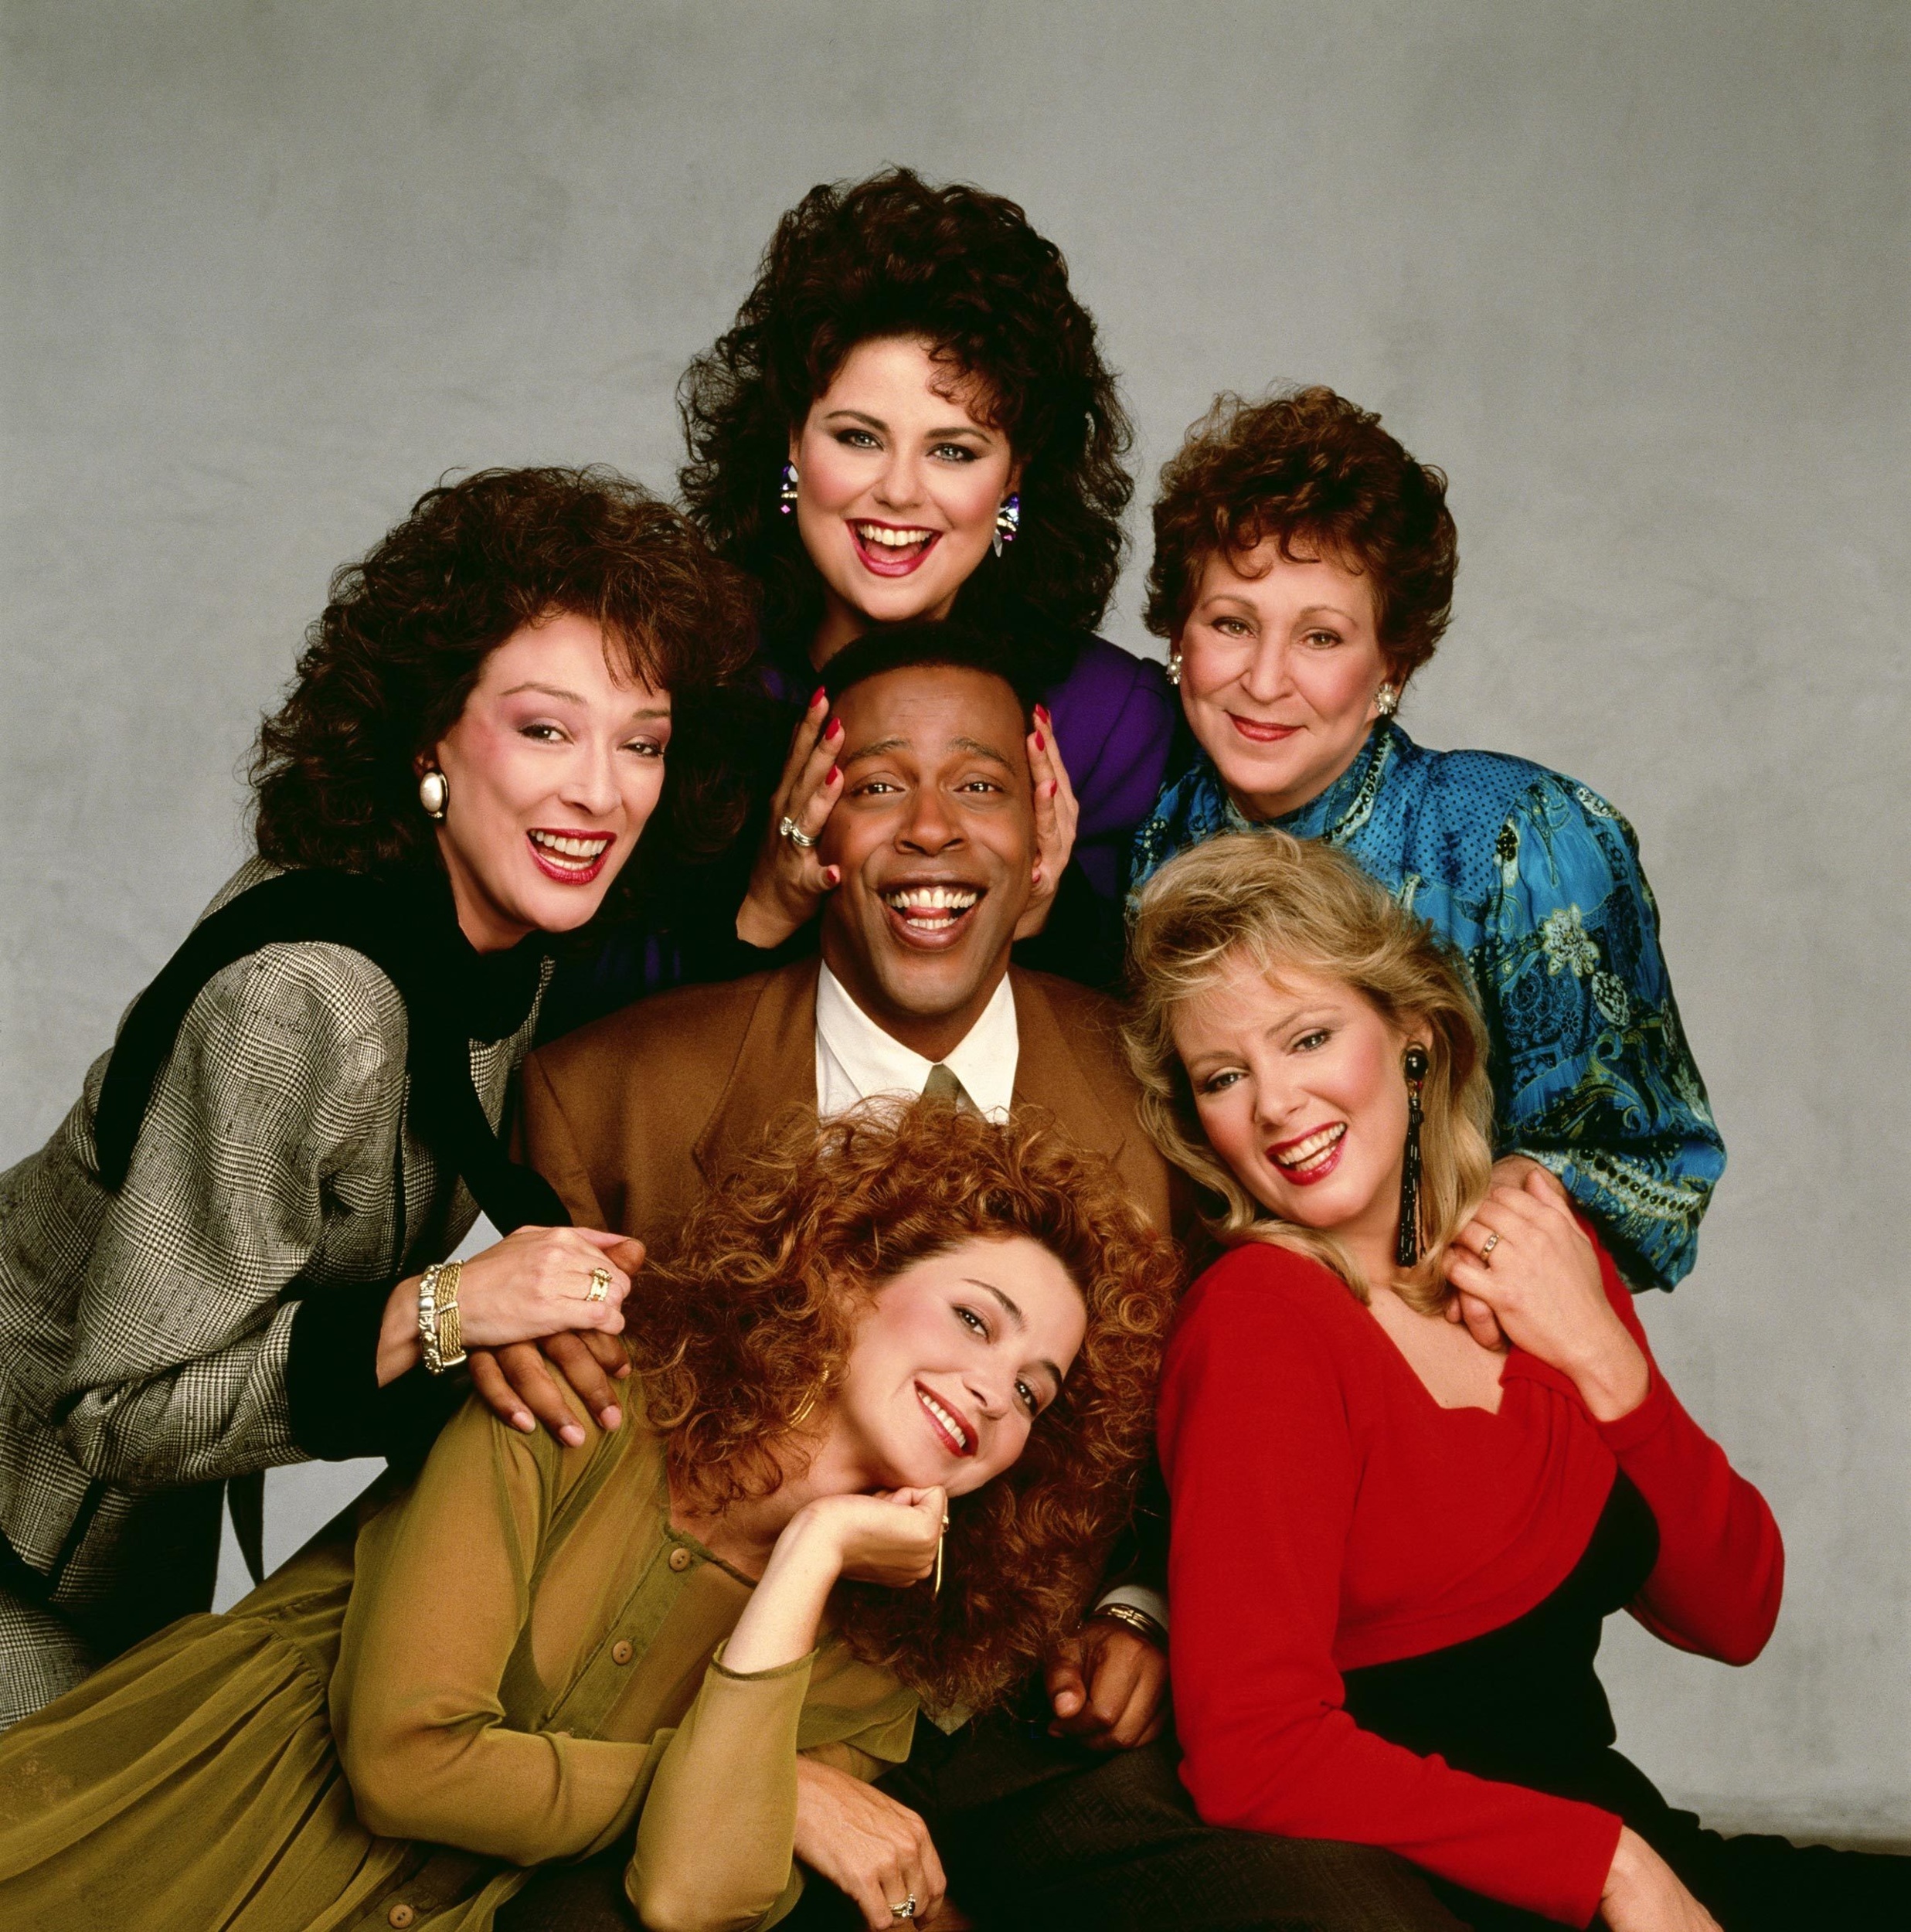 <p>It’s easy to identify the moment when <span><em>Designing Women </em>— </span>the hit sitcom about four women who run an interior design firm in Atlanta, Georgia — jumped the shark. The very first episode of the sixth season marked the departure of Delta Burke, who had portrayed the feisty Suzanne Sugarbaker. Given how central she was to the series’ chemistry, her departure changed the show for the worse. The subsequent departure of Jean Smart, who had played the lovable and naive Charlene, also fatally weakened the show. Not even the presence of Jan Hooks, Julia Duffy, and Judith Ivey could save it.</p><p><a href='https://www.msn.com/en-us/community/channel/vid-cj9pqbr0vn9in2b6ddcd8sfgpfq6x6utp44fssrv6mc2gtybw0us'>Follow us on MSN to see more of our exclusive entertainment content.</a></p>